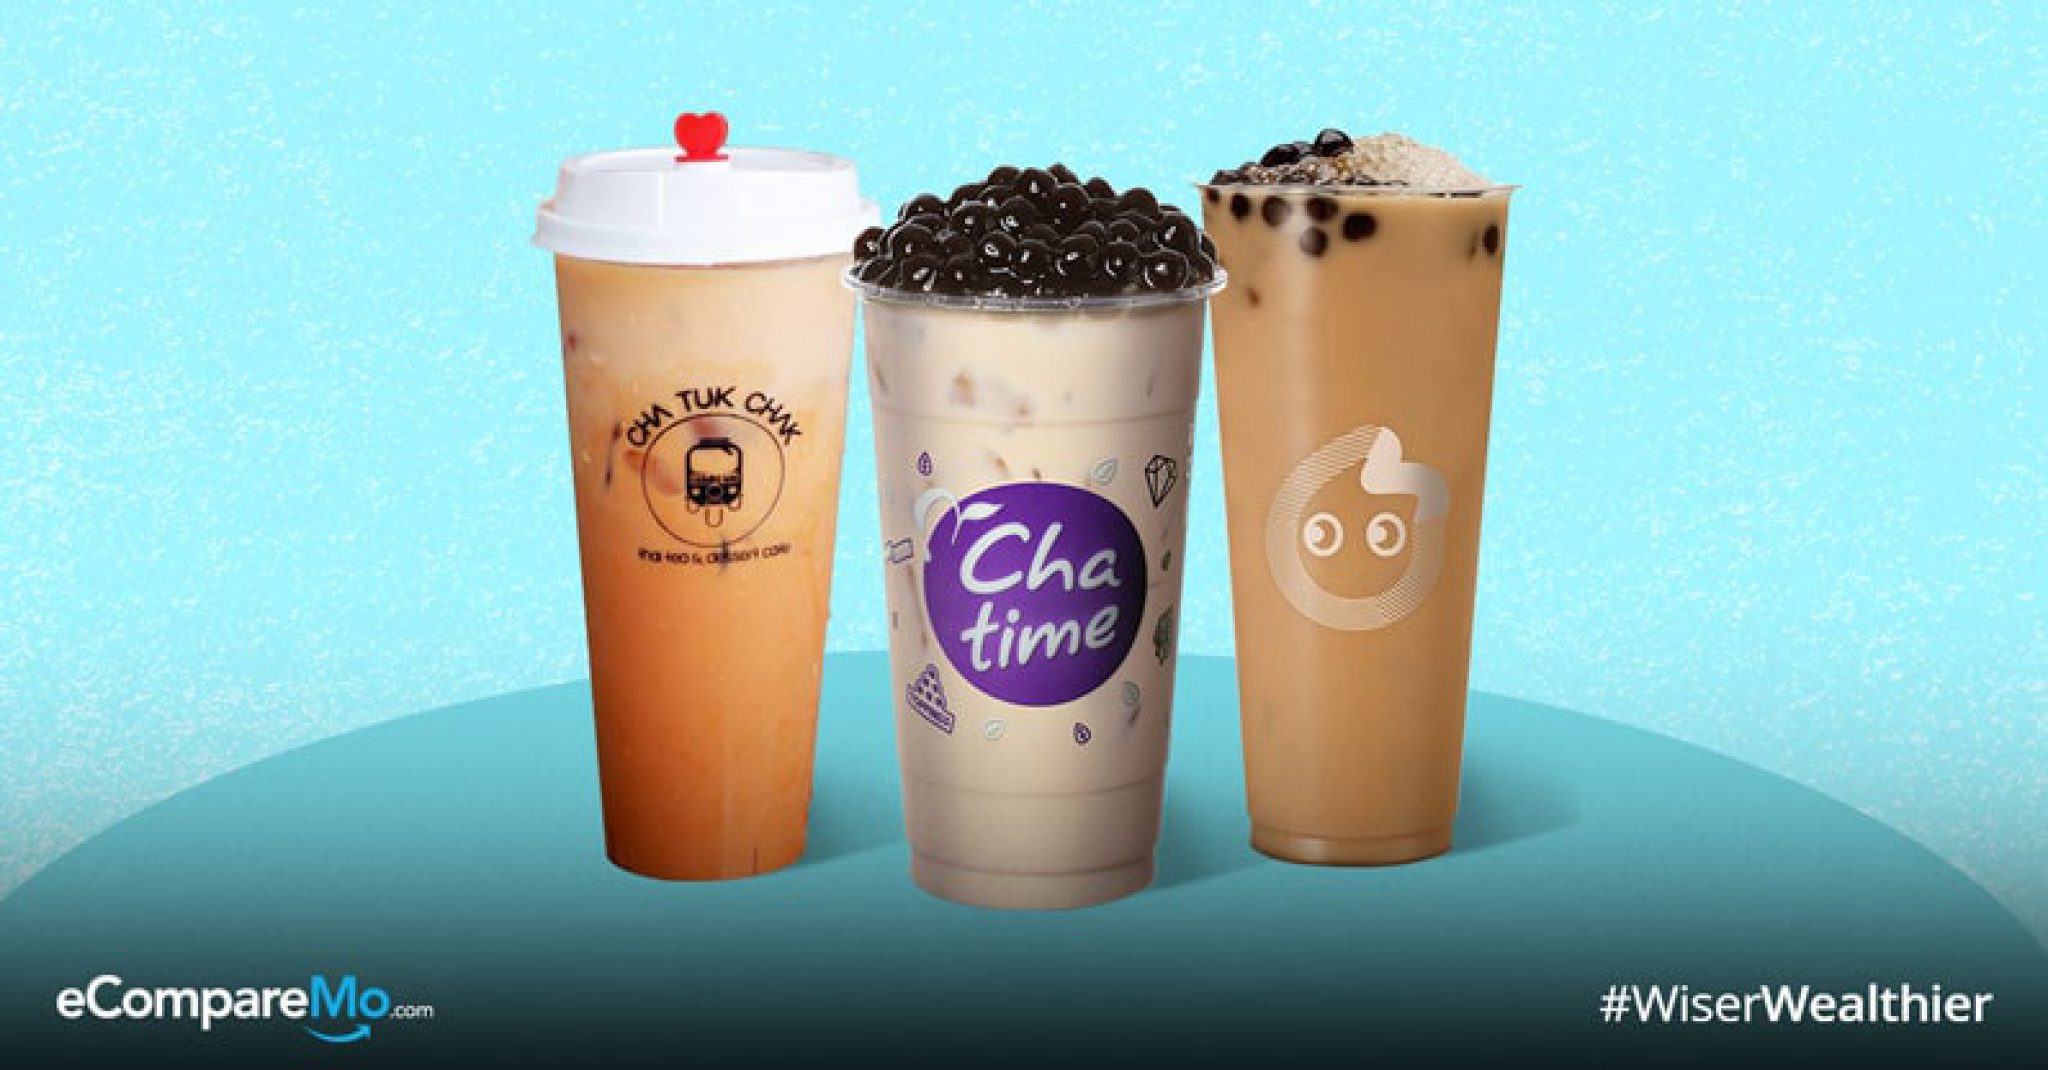 Best Milk Tea Shops In Manila: Here Are The Bestsellers - eCompareMo